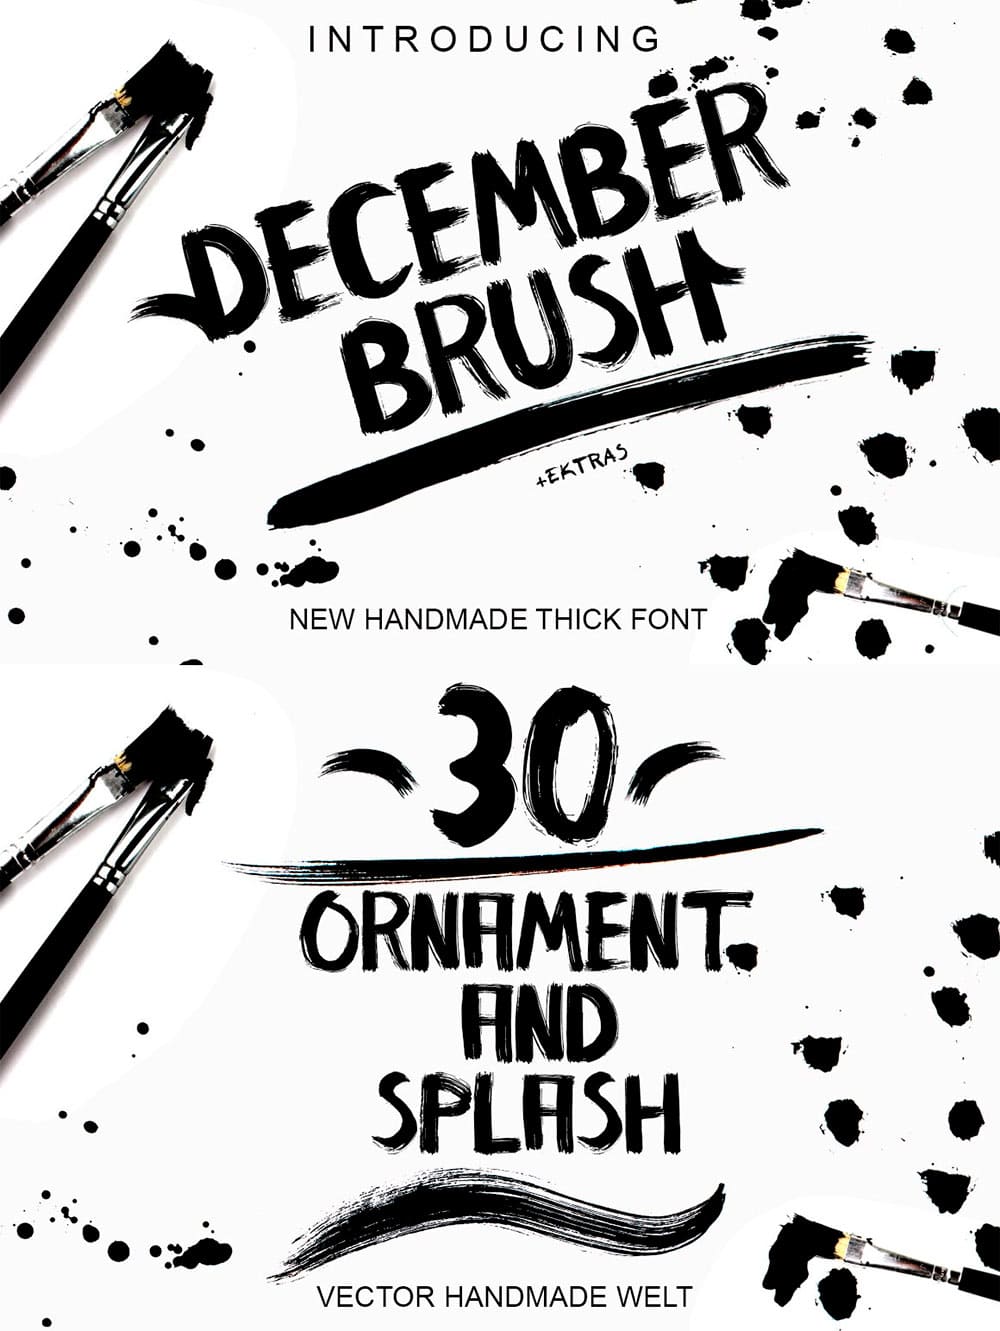 December brush and extras, picture for pinterest.